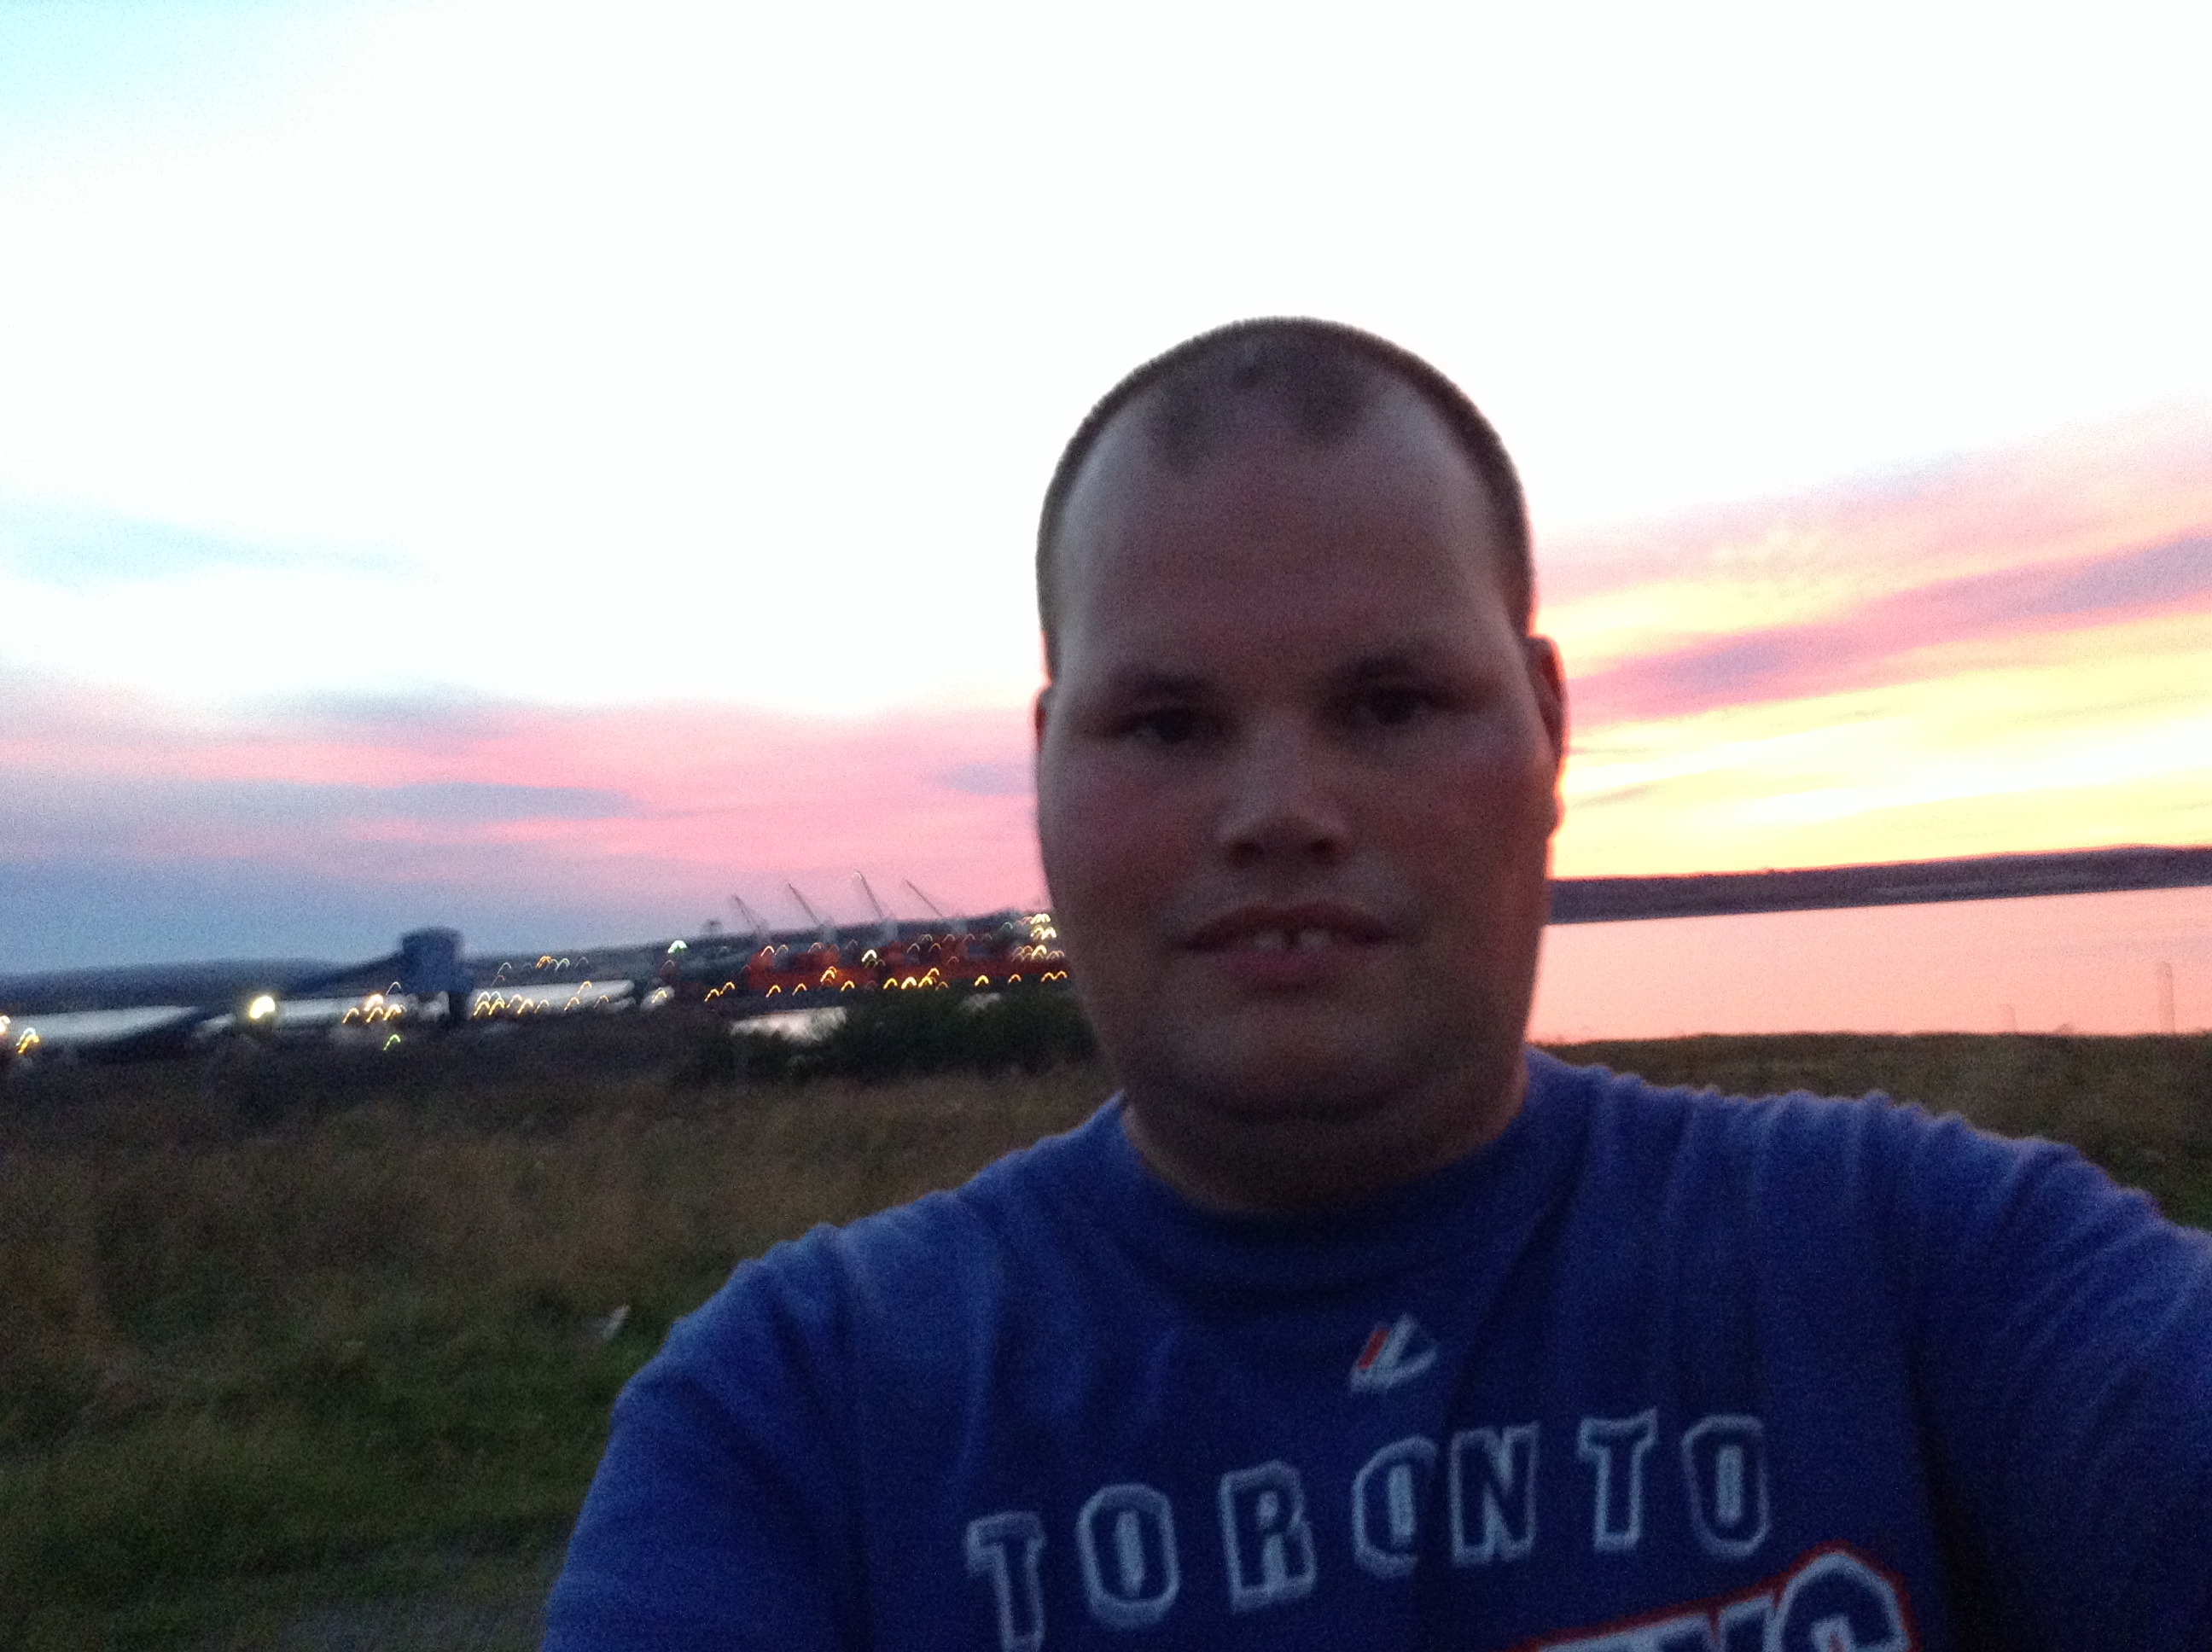 Frankie MacDonald having a good time Taking Pictures